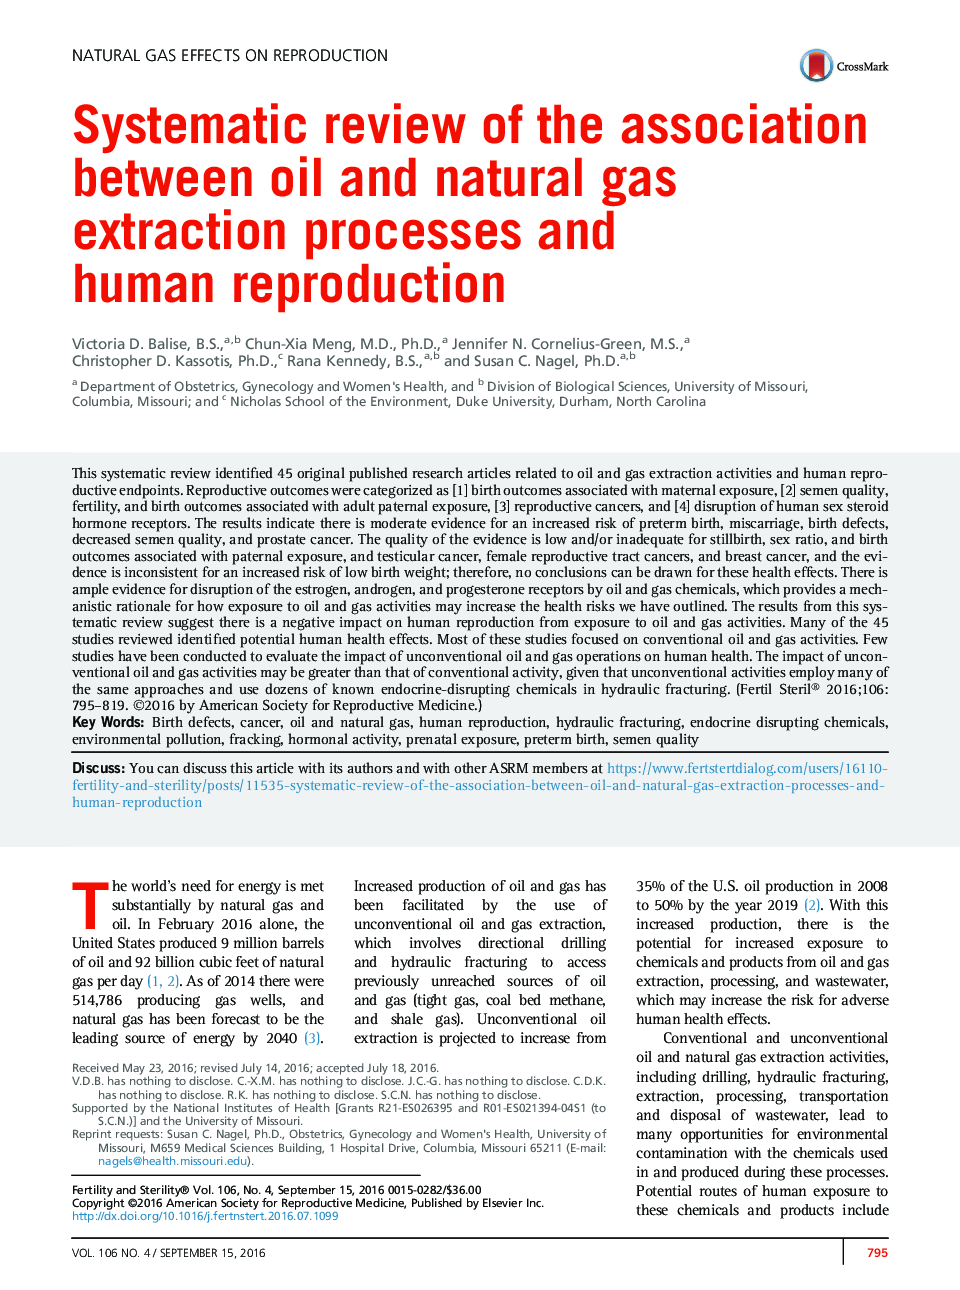 Systematic review of the association between oil and natural gas extraction processes and human reproduction 